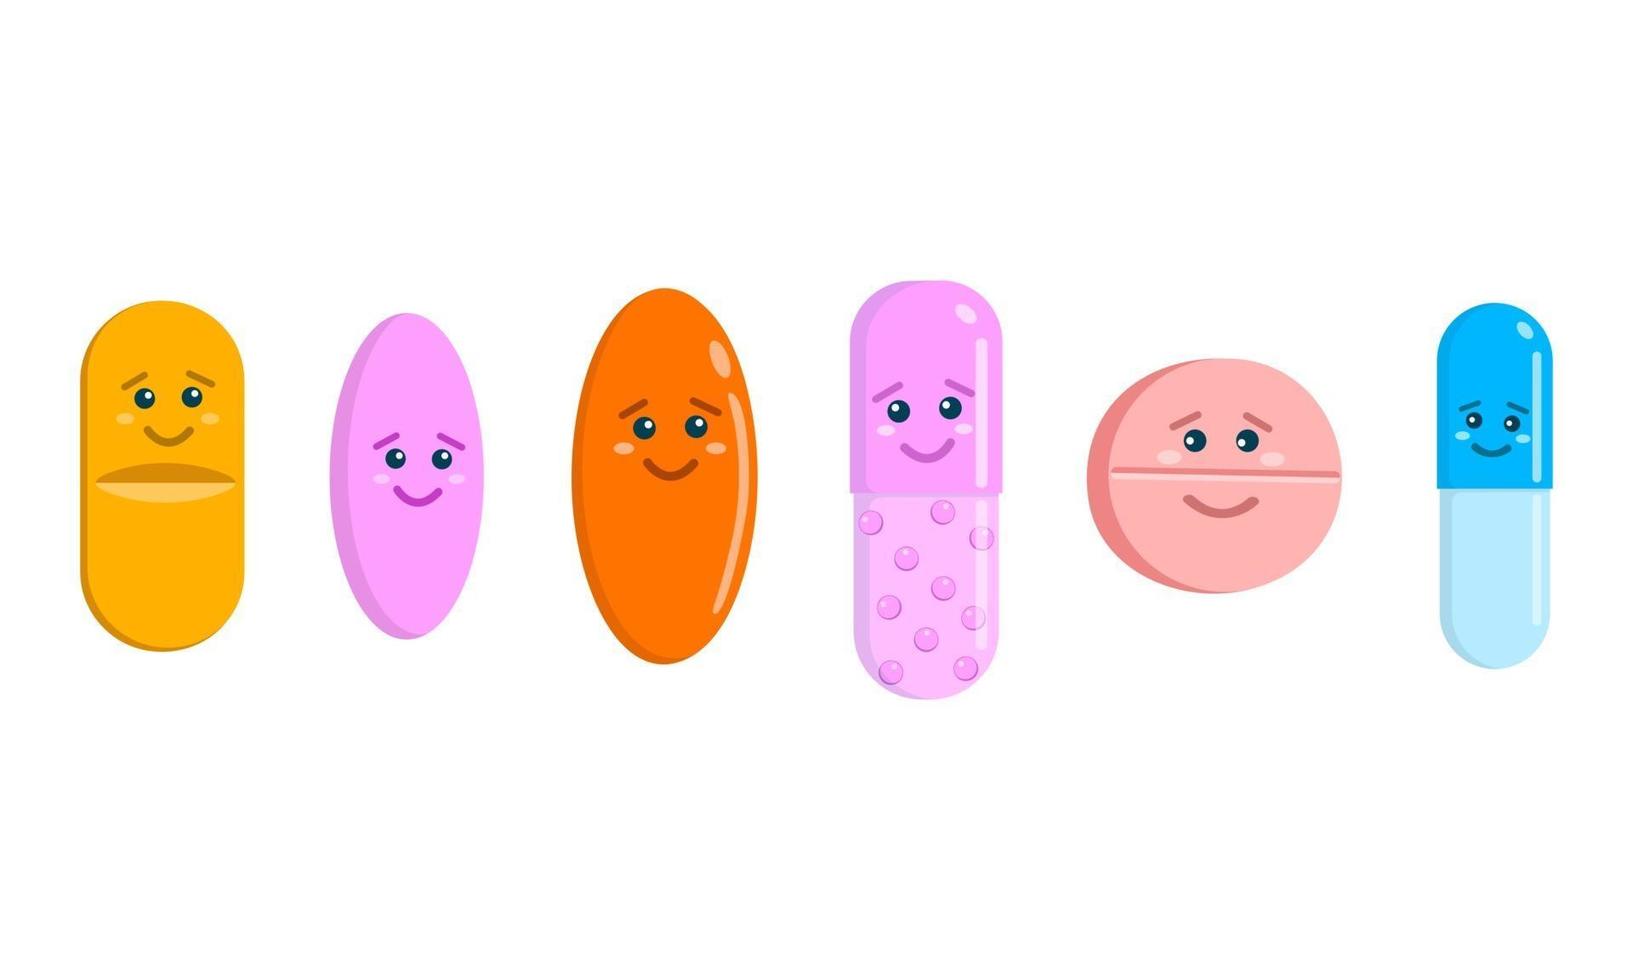 Cute pills characters isolated on white background. Set of tablets and capsules icons with funny faces. Medicine and healthcare for kids vector